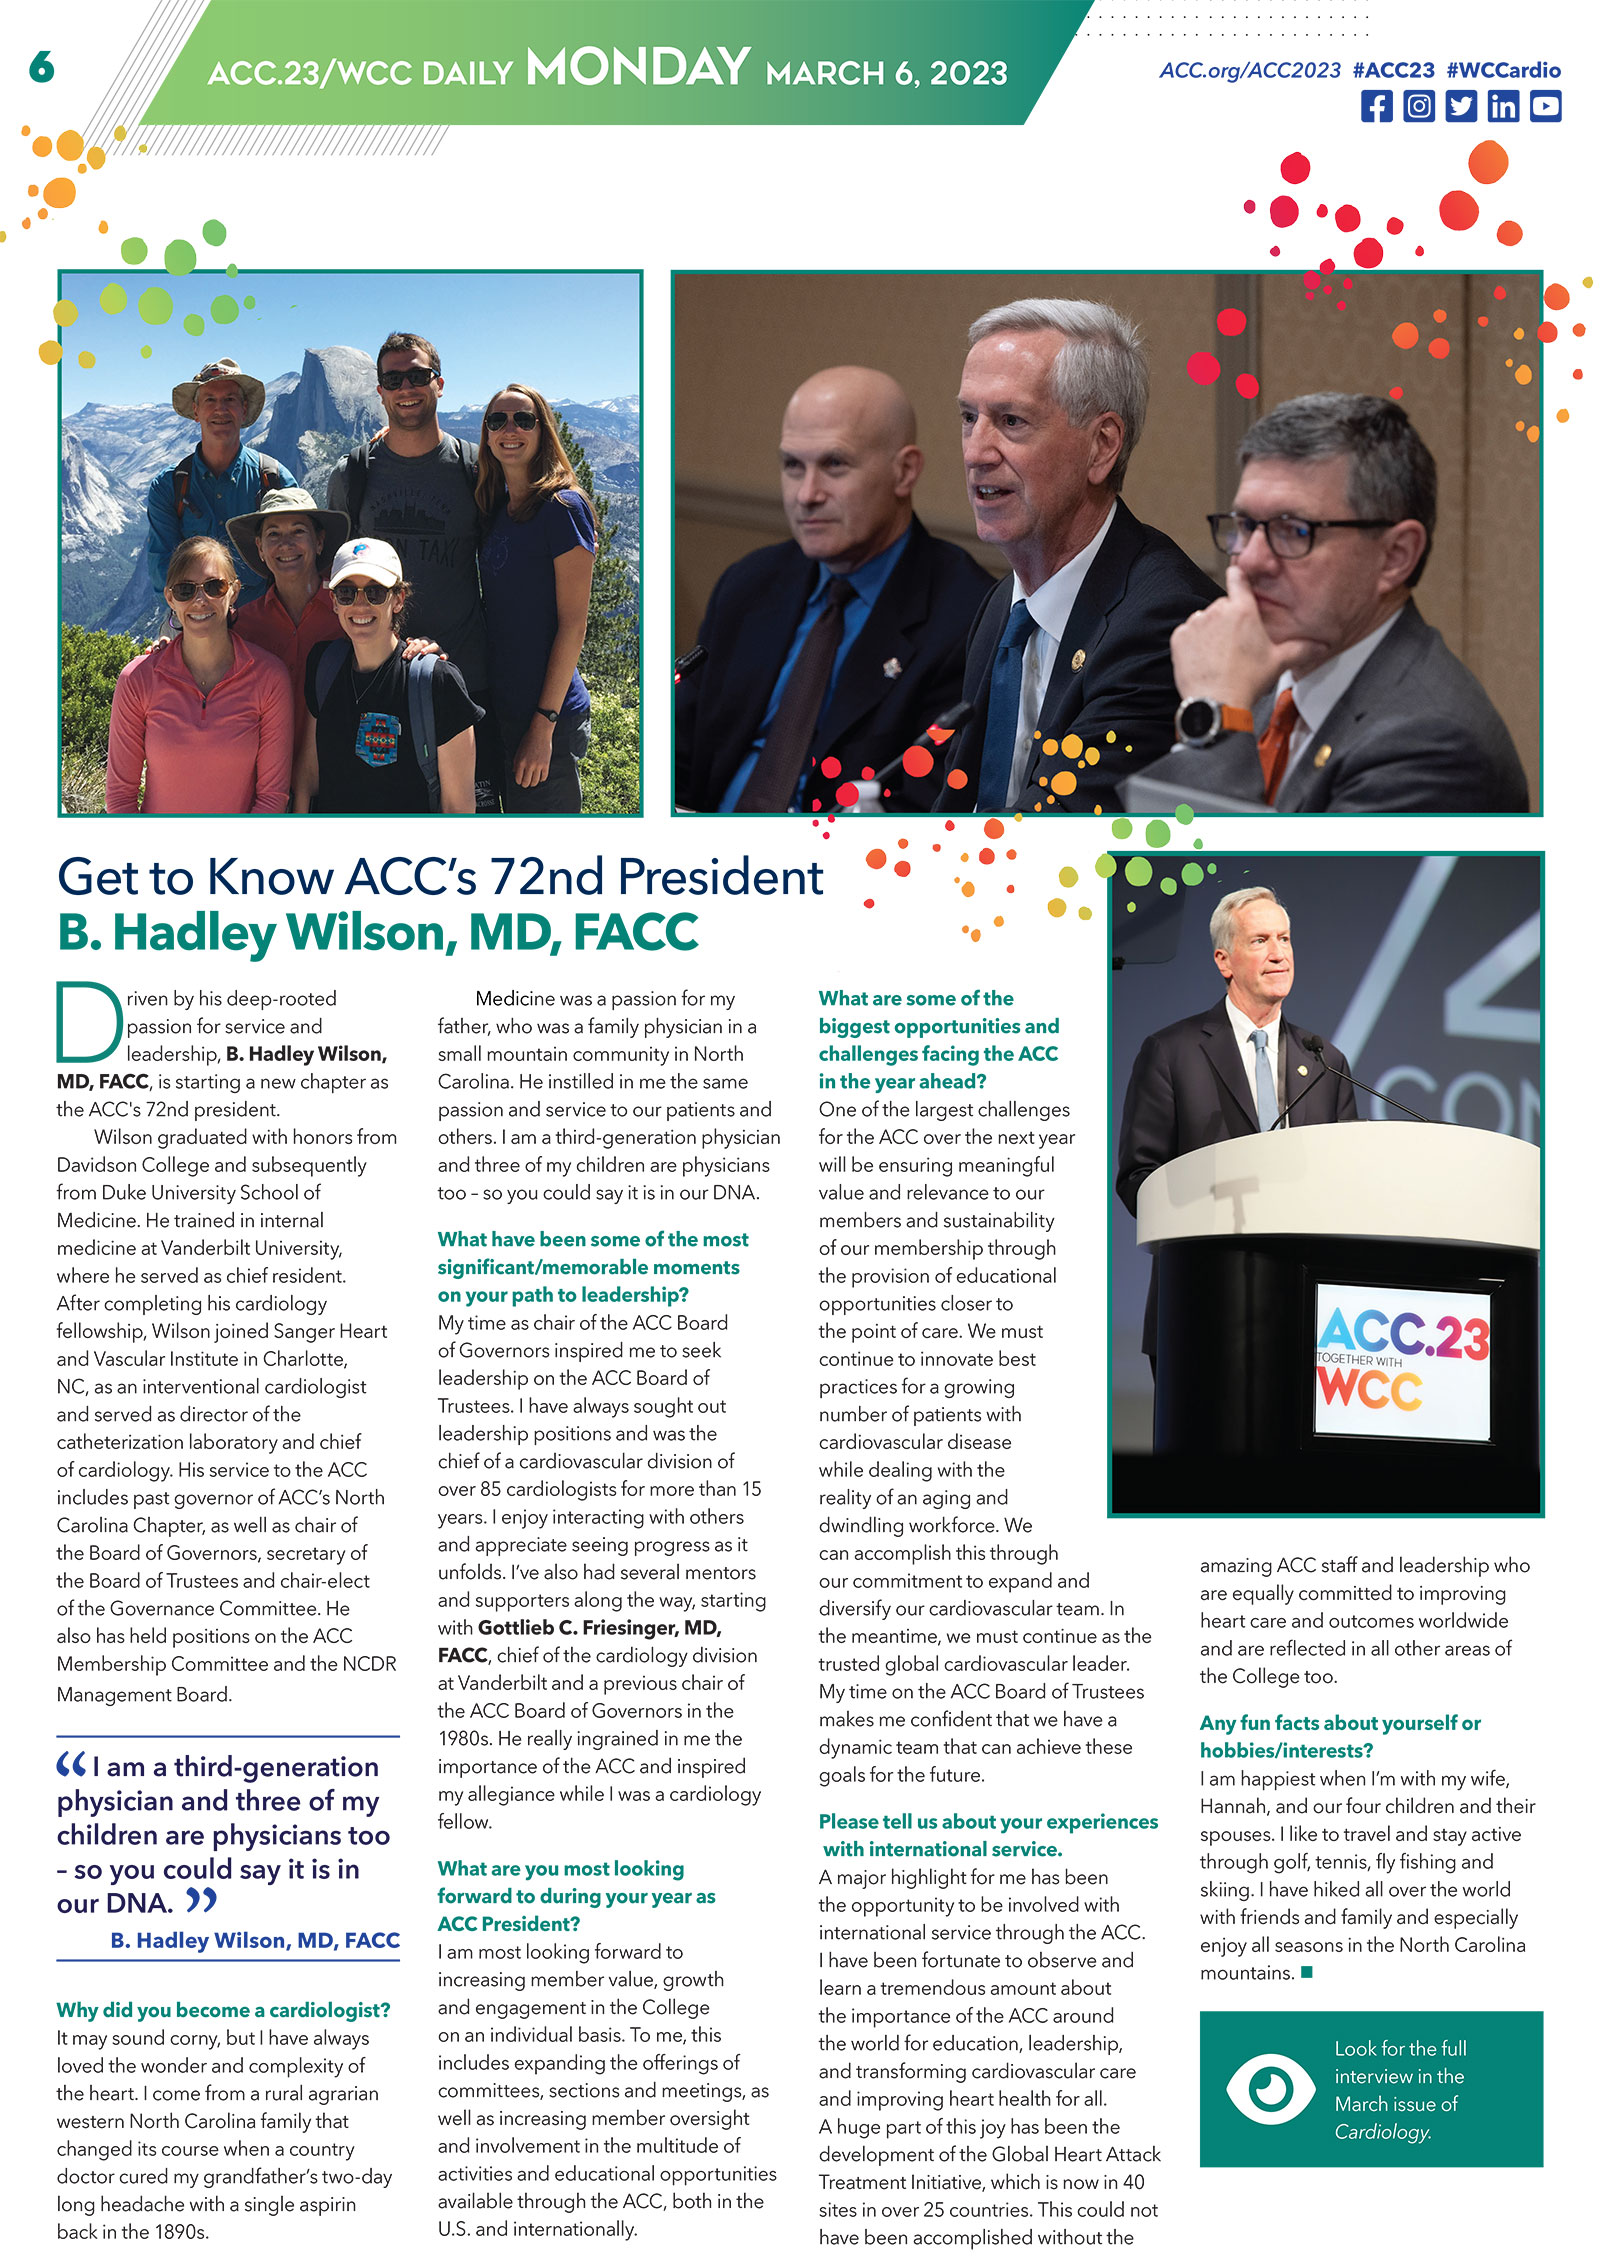 ACC.23 With WCC Daily Newspaper March 6, 2023